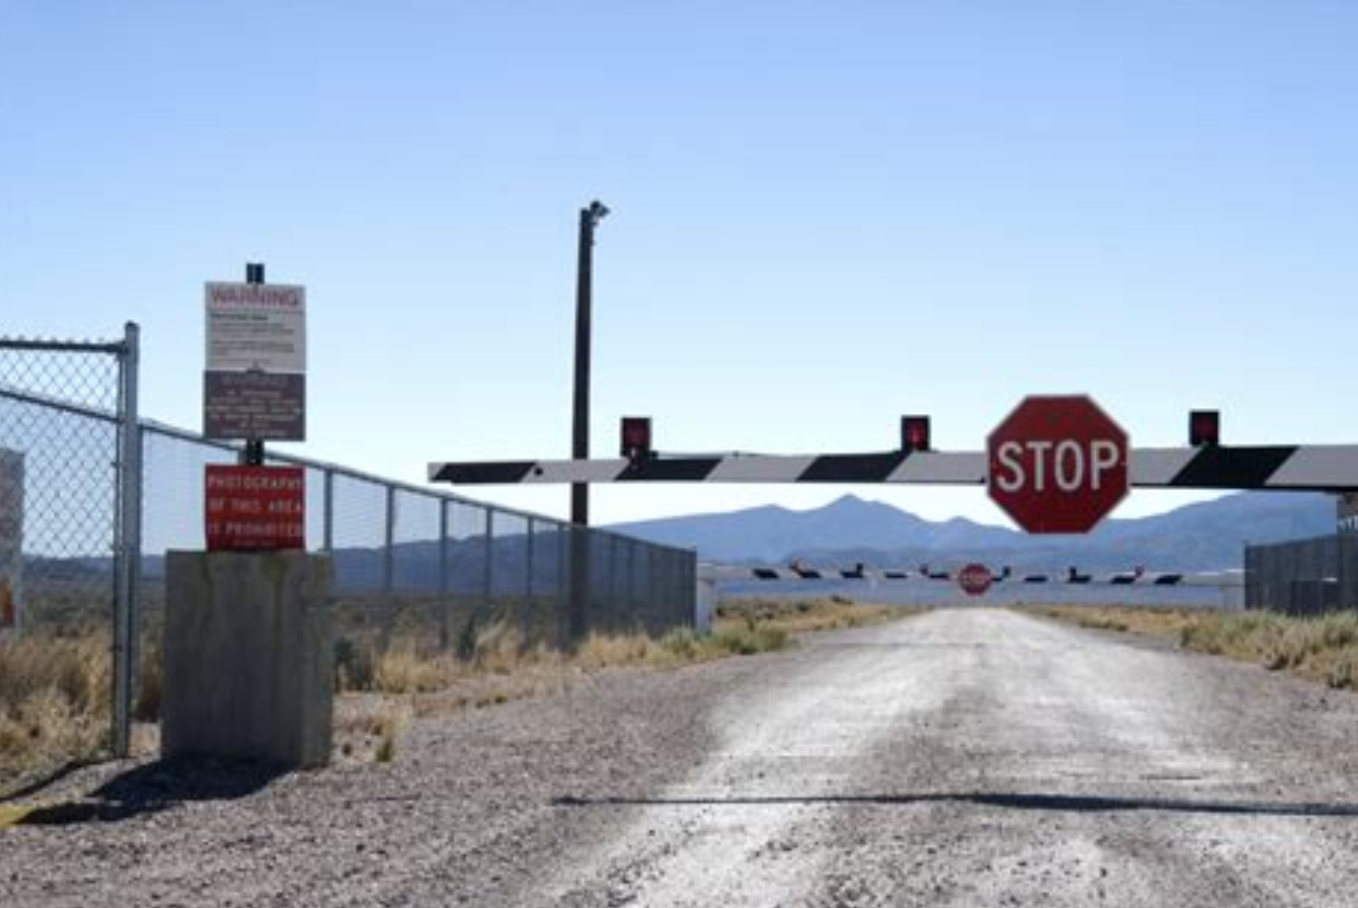 What’s Really Going On At Area 51: Maybe the Biggest UFO Party On Earth (#GotBitcoin?)